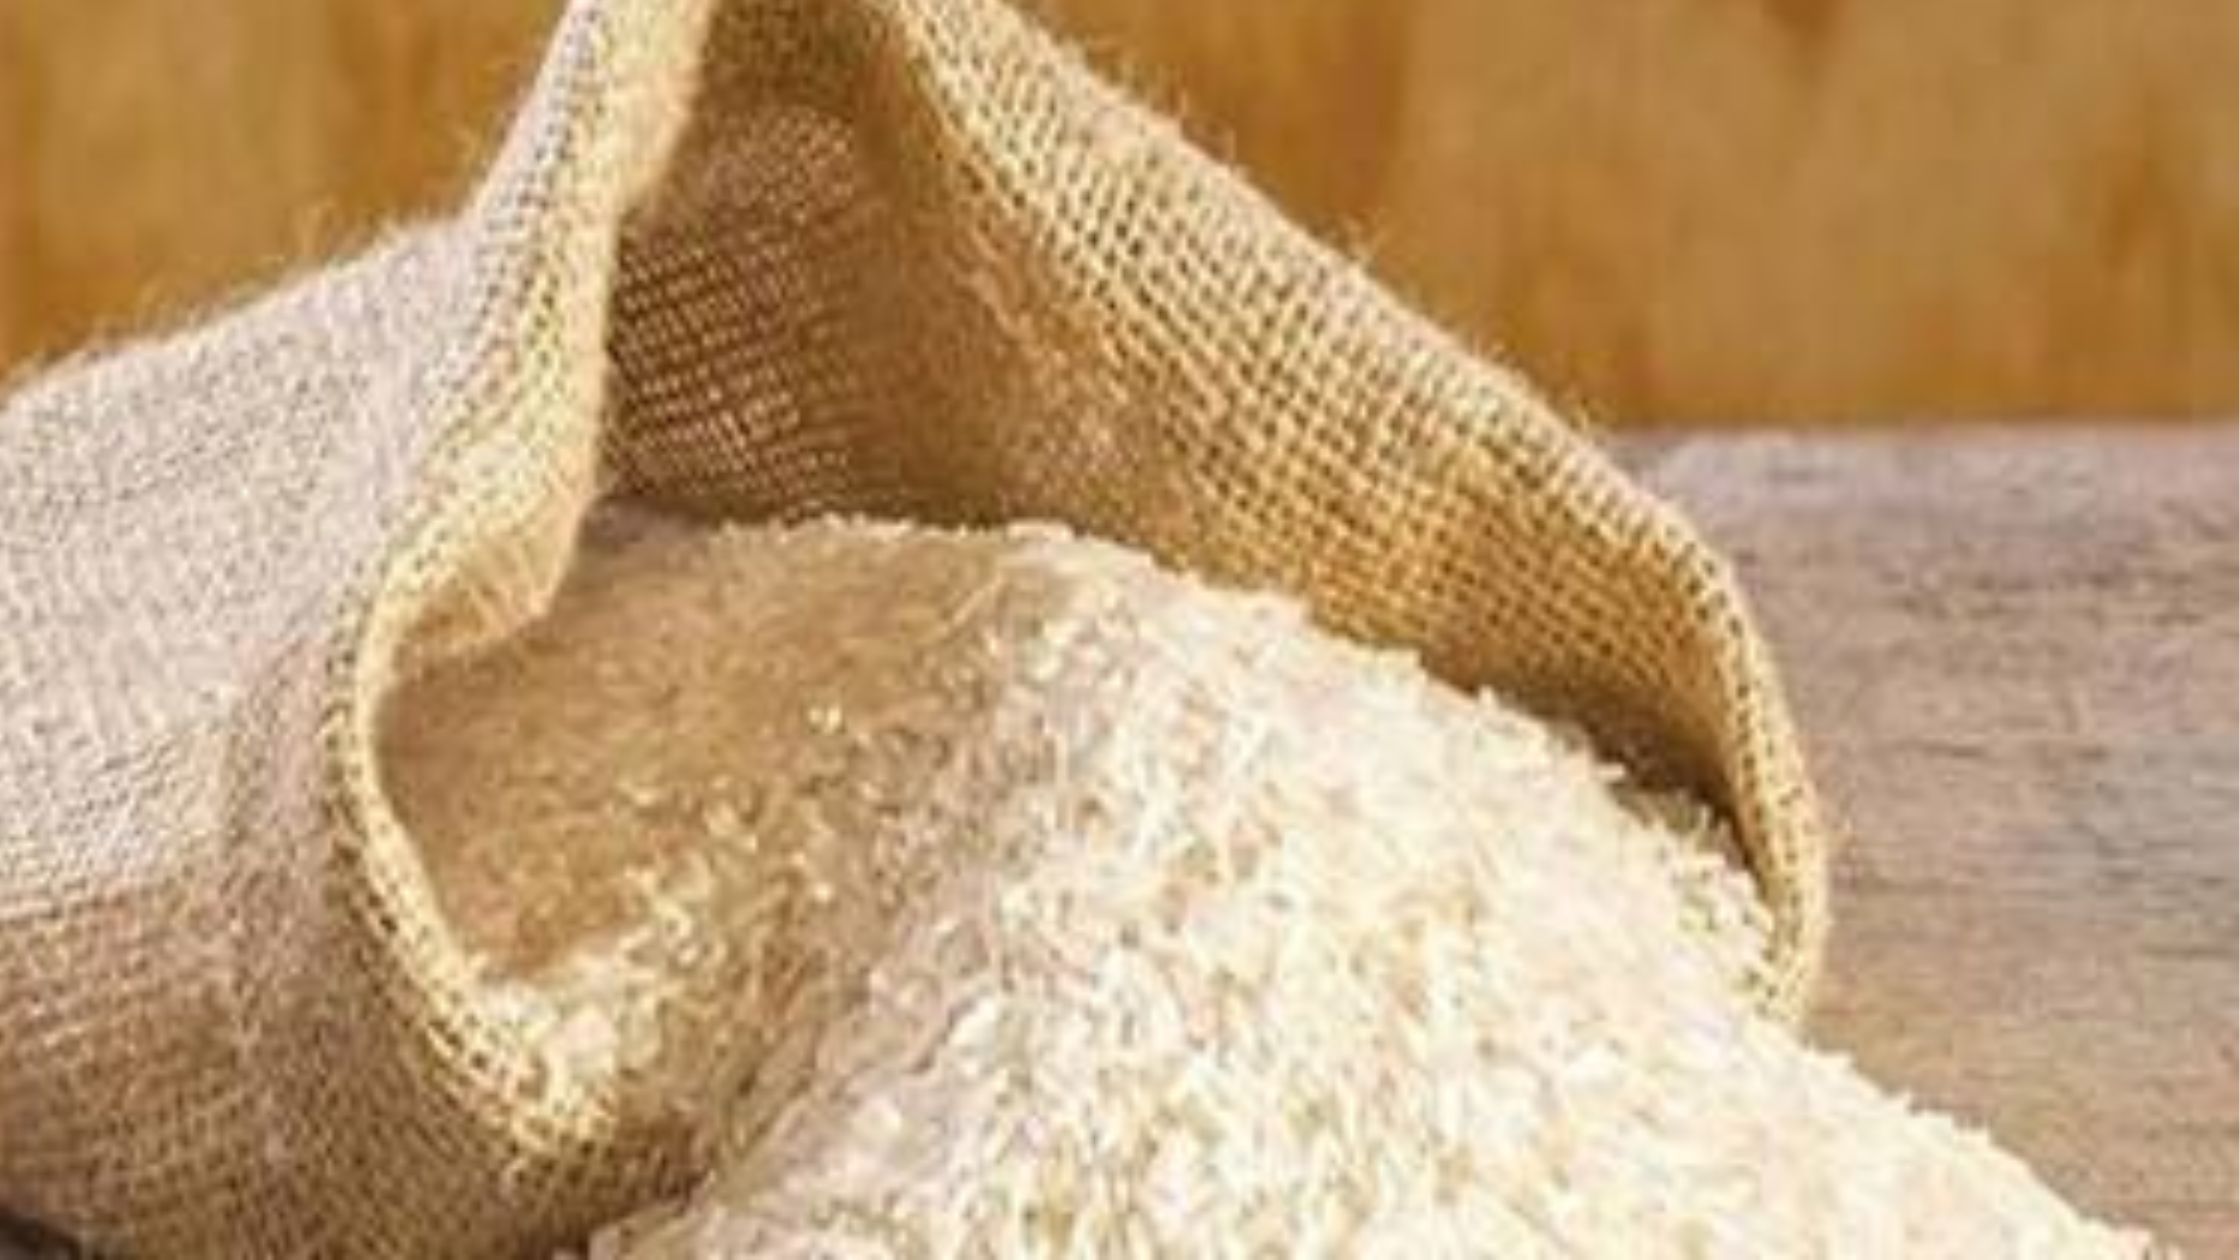 Procurement of 30 lakh metric tonnes of rice this year